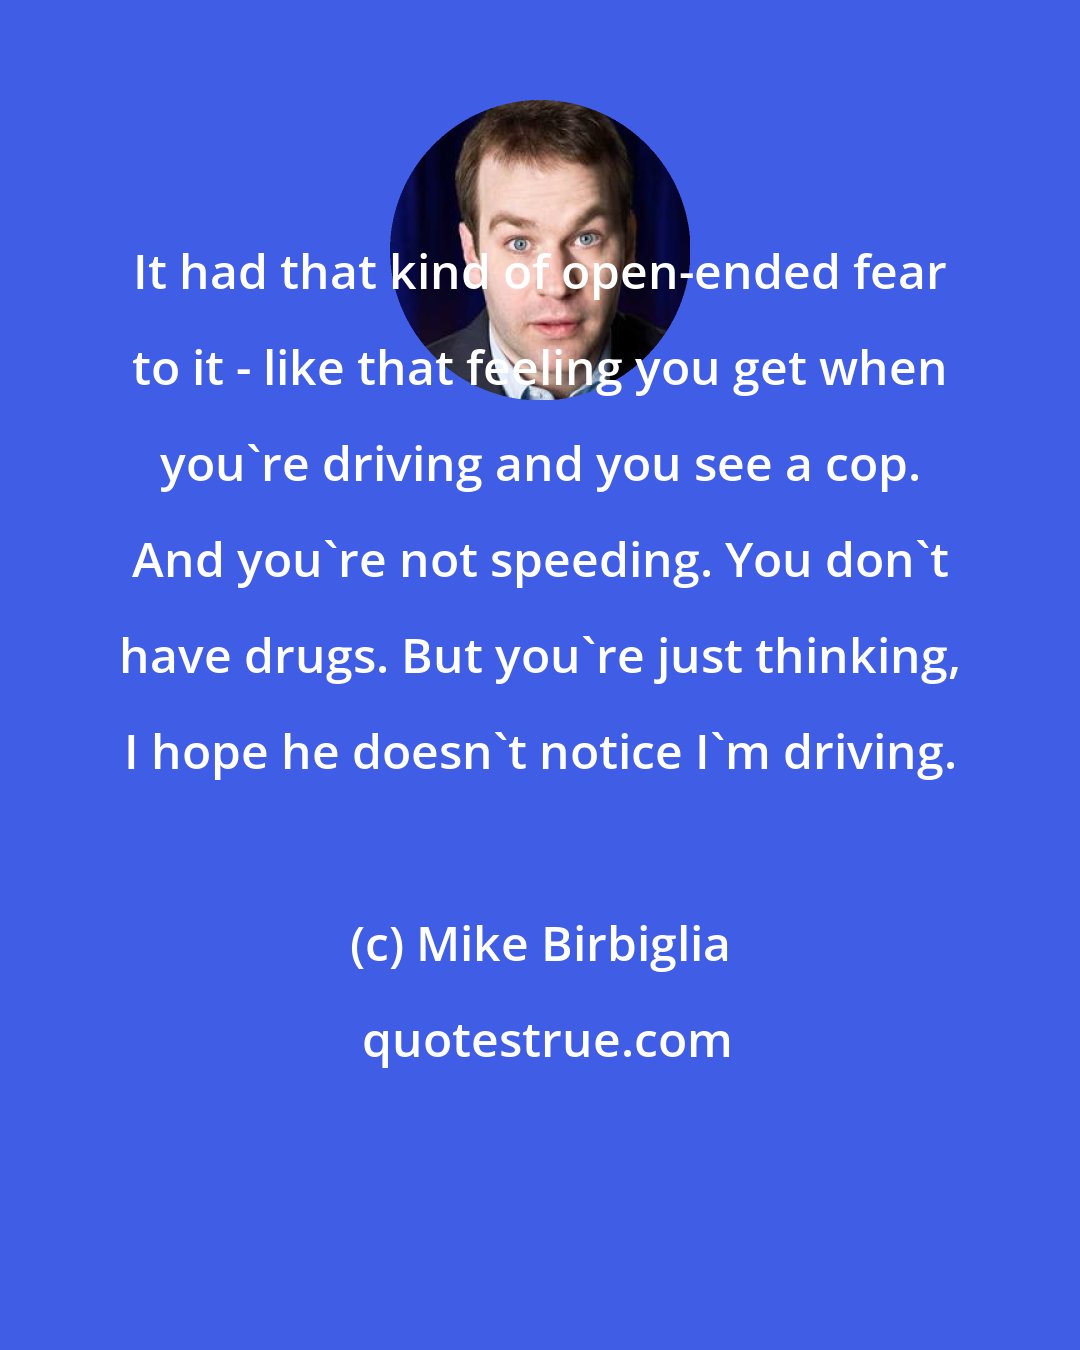 Mike Birbiglia: It had that kind of open-ended fear to it - like that feeling you get when you're driving and you see a cop. And you're not speeding. You don't have drugs. But you're just thinking, I hope he doesn't notice I'm driving.